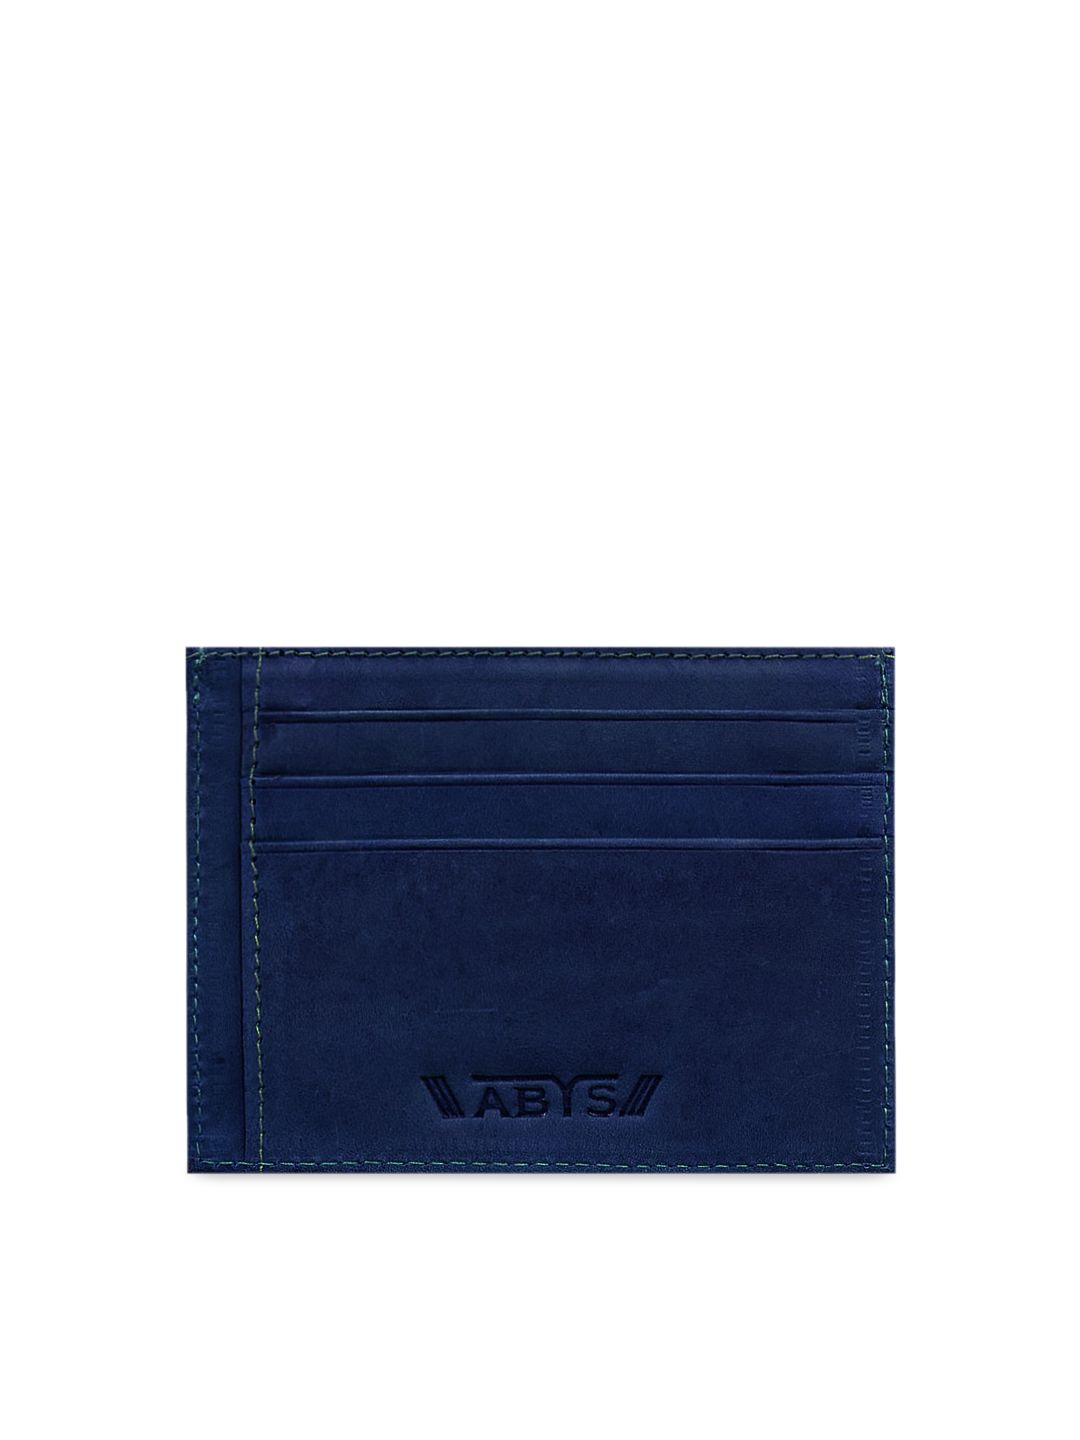 ABYS Unisex Blue Solid Genuine Leather Wallet Price in India